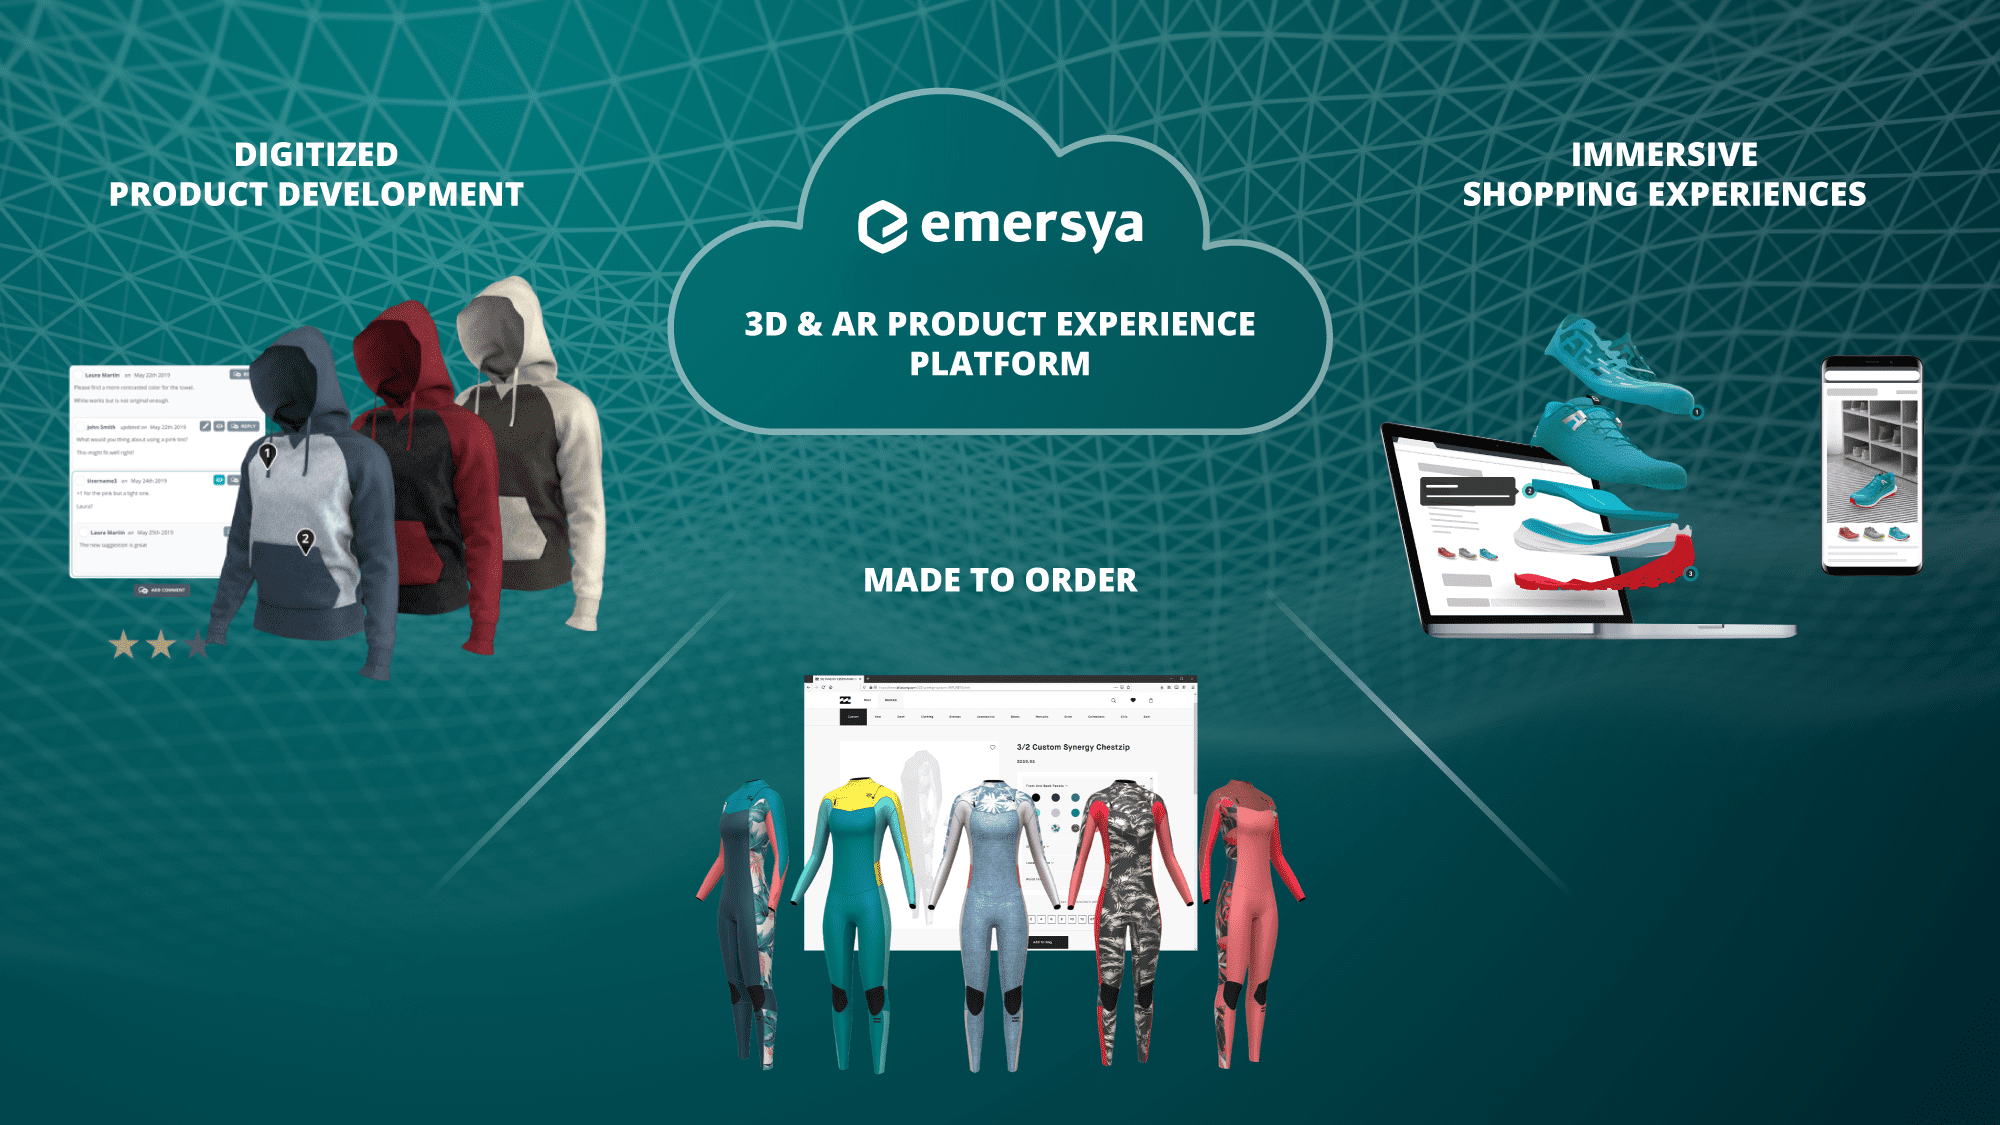 Graphic displaying various articles of clothing. Text: Emersya 3D & AR product experience platform. Digitized product development. Made to order. Immersive shopping experiences.